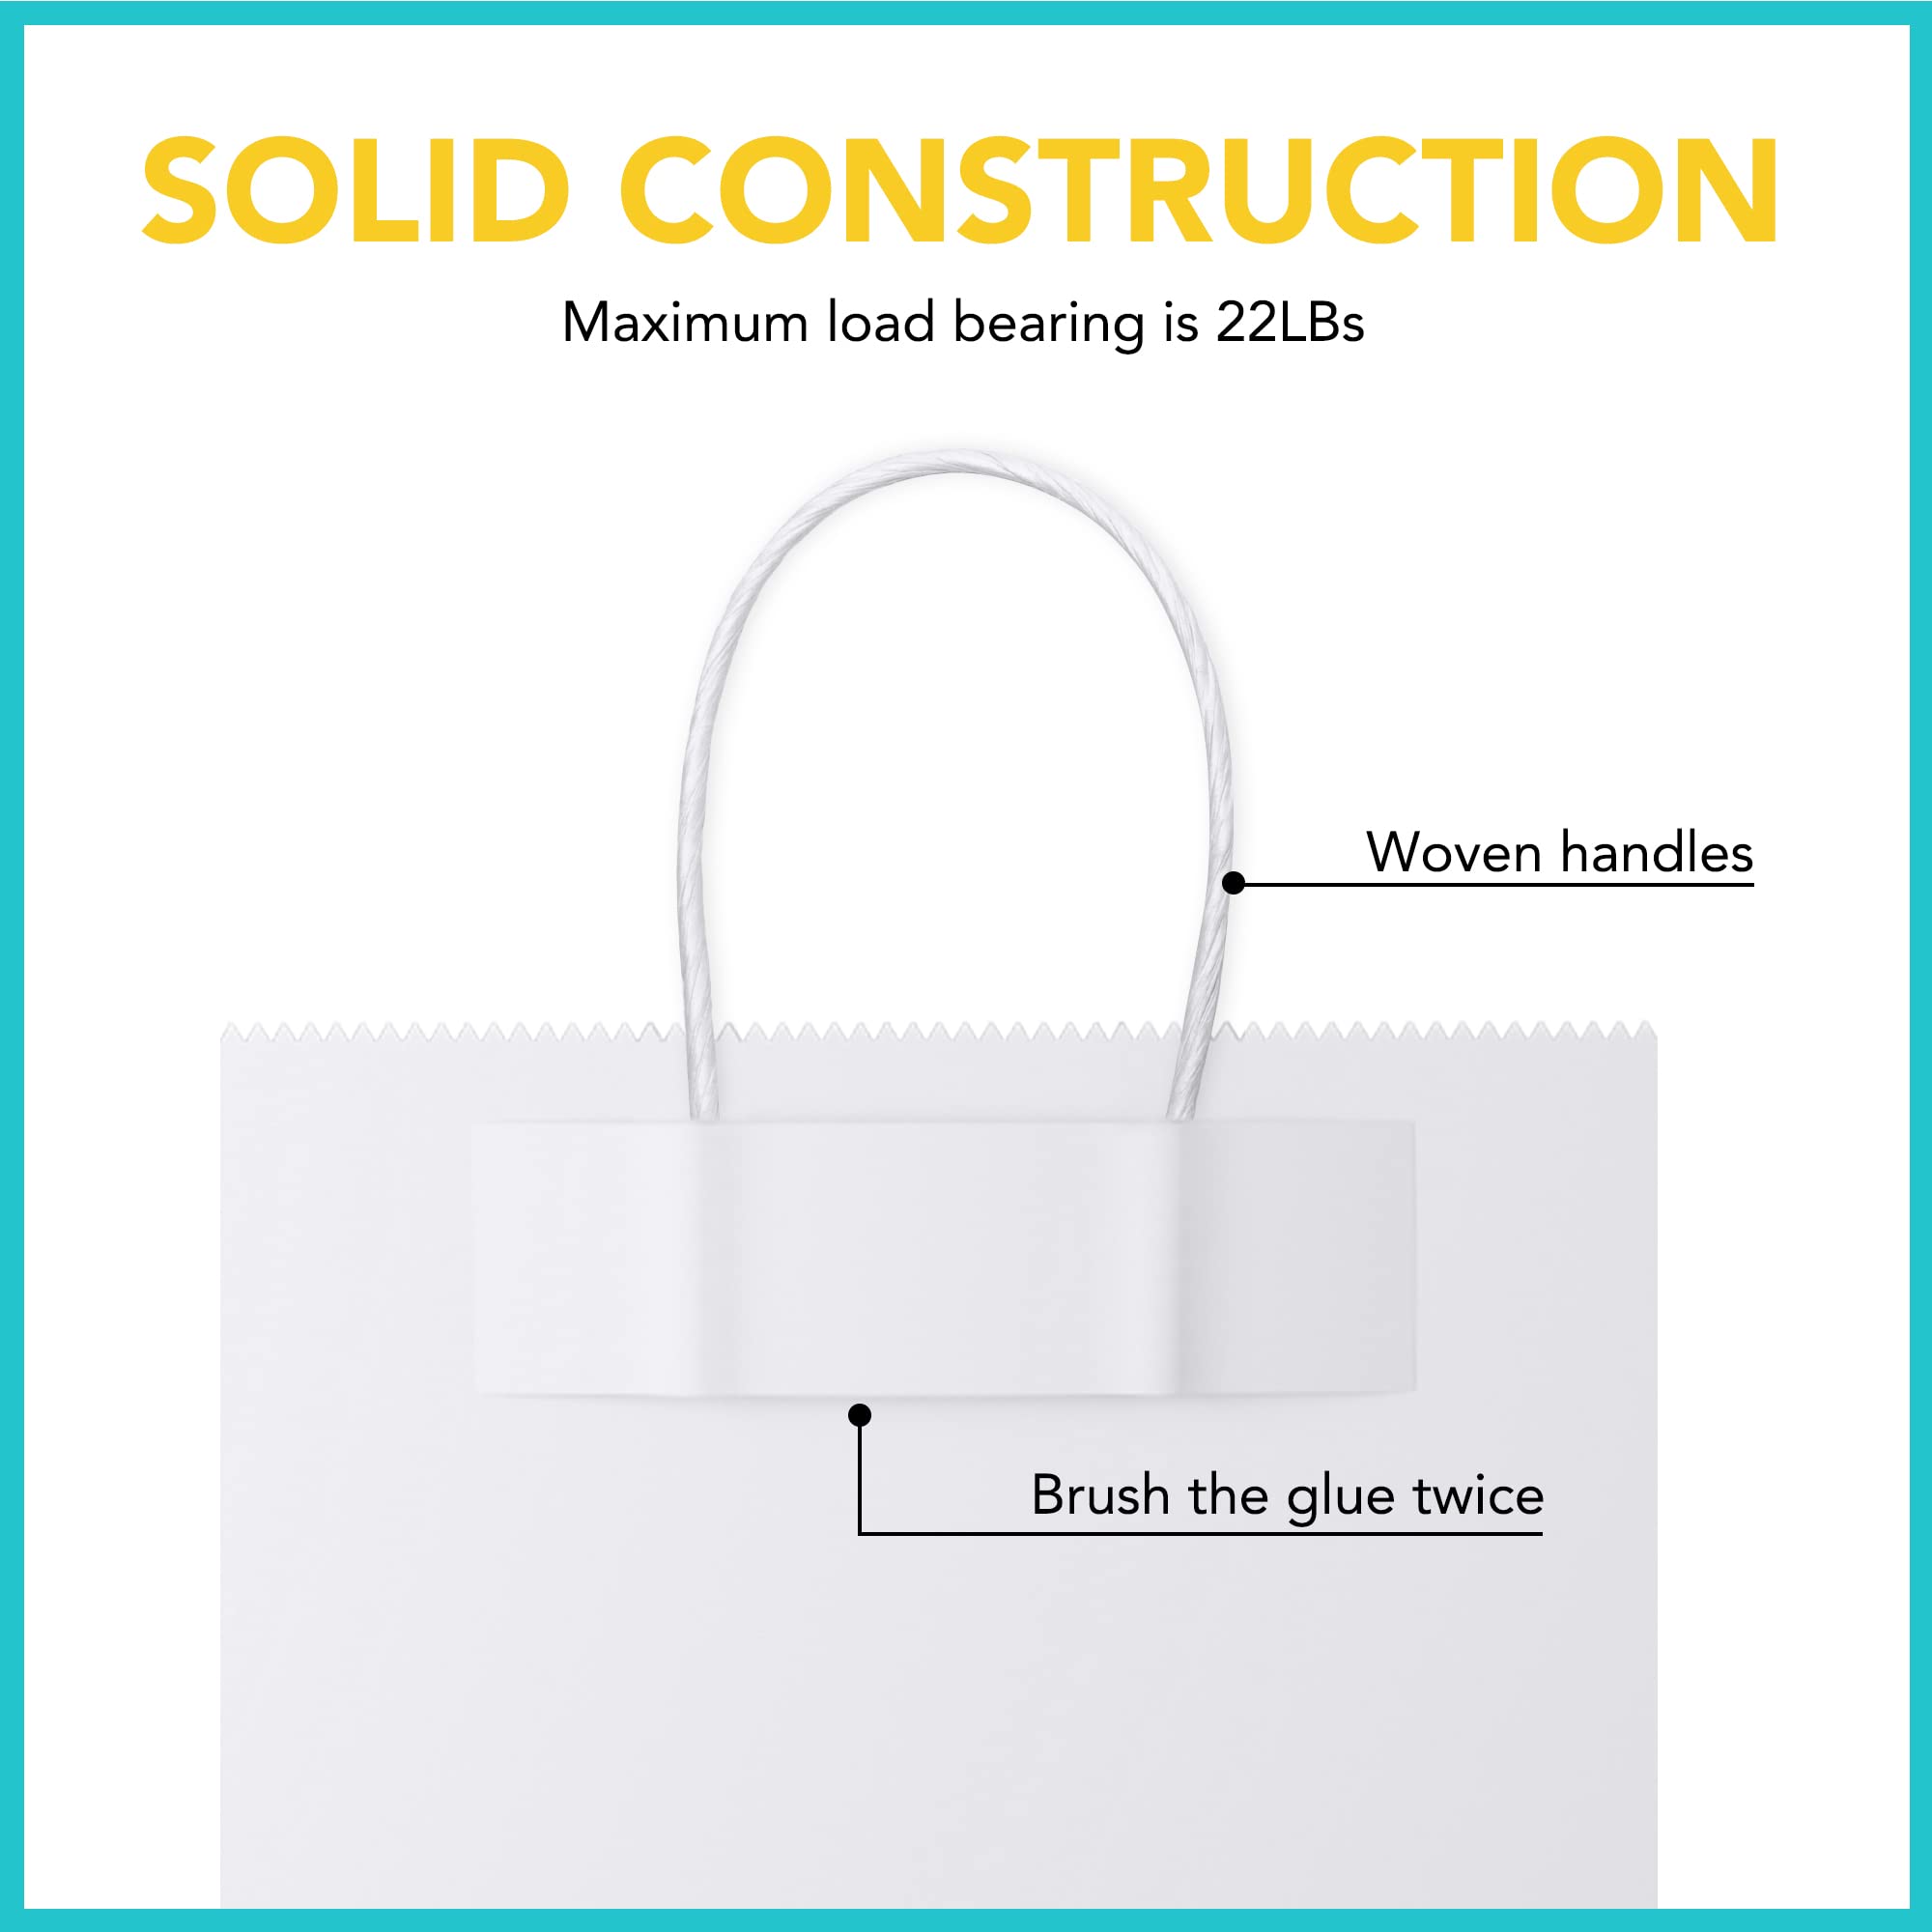 MESHA White Shopping Bags 16x6x12 Inches 50Pcs & 8x4.75x10.5 Inches 50Pcs Paper Bags with Handles Small Gift Bags,Wedding Party Favor Bags